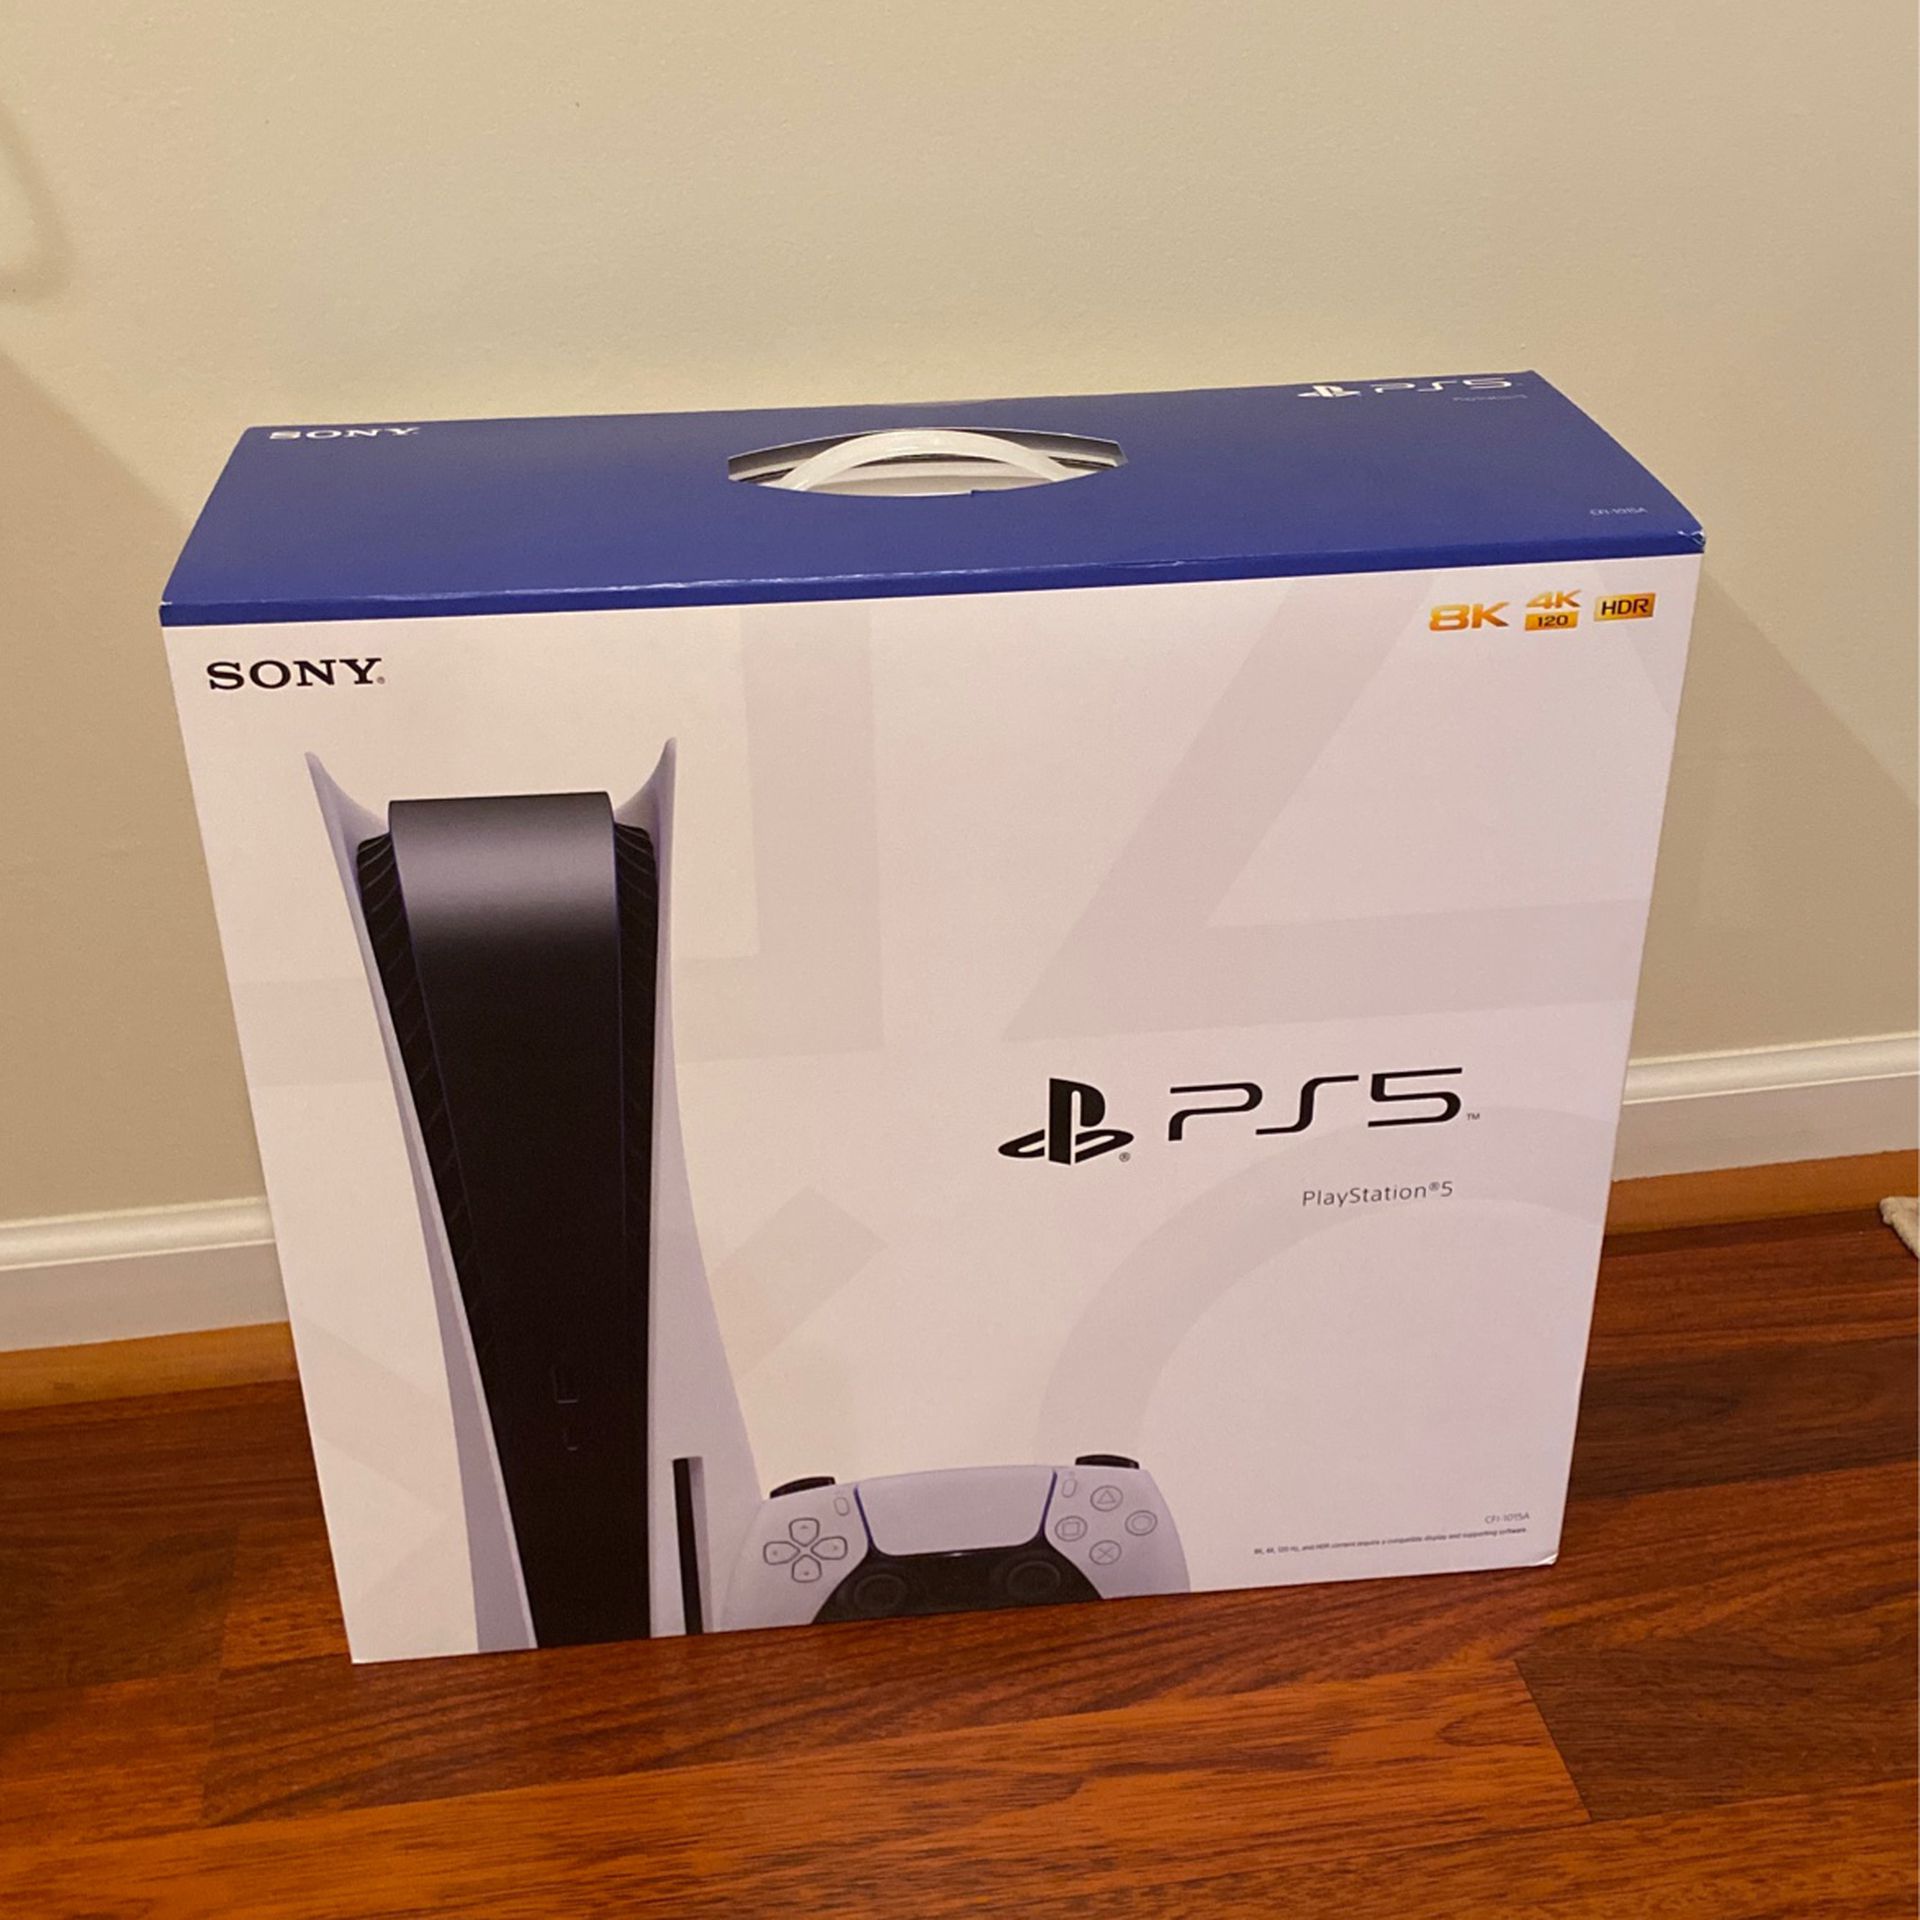 Playstation 5 Disc brand new in box unopened!! Price is firm